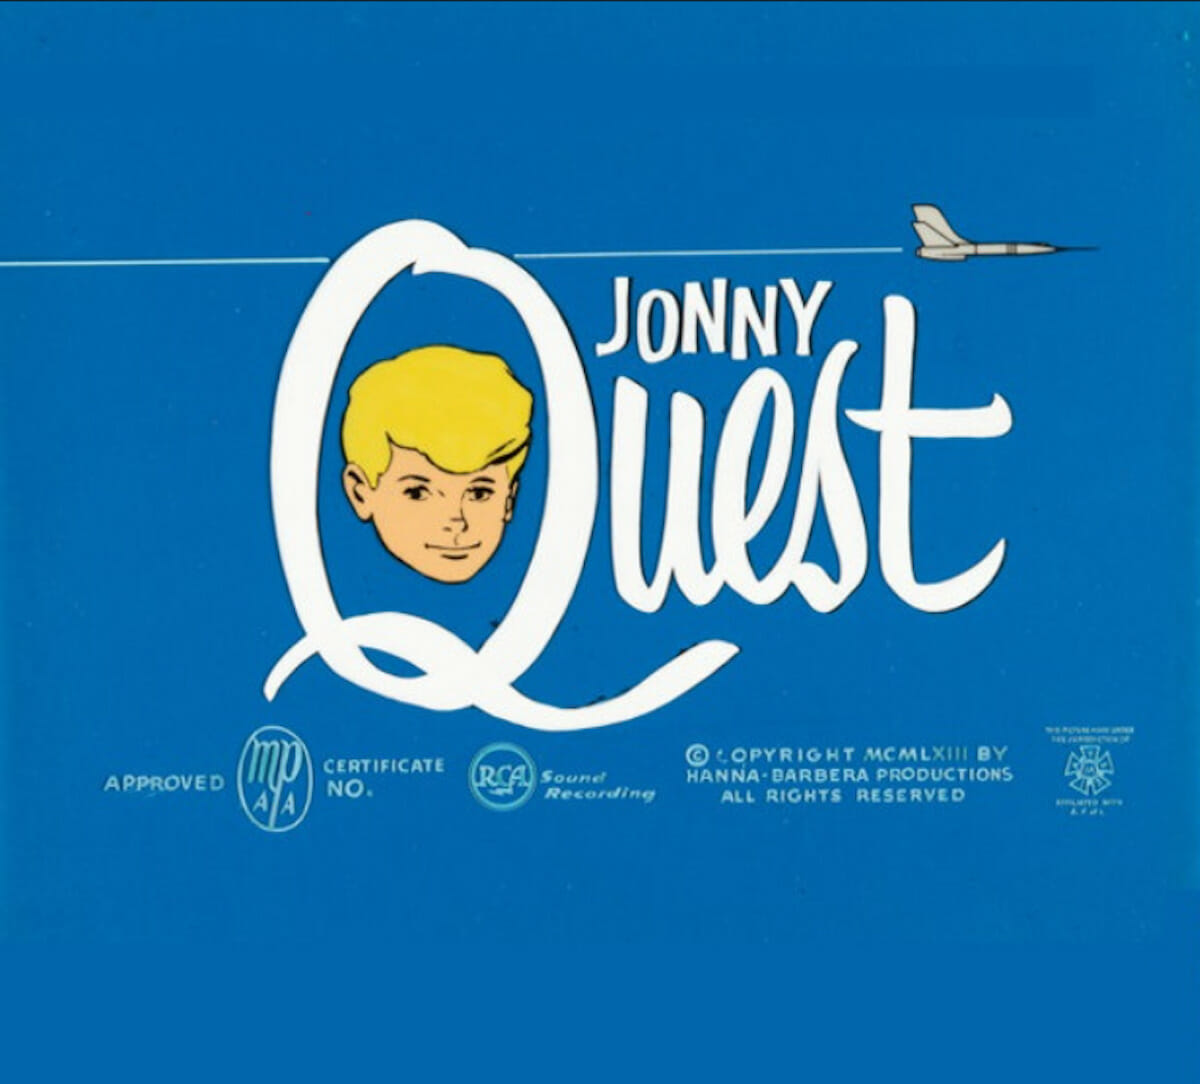 Jonny Quest and the Missing Point: The Censorship Standards of Mid